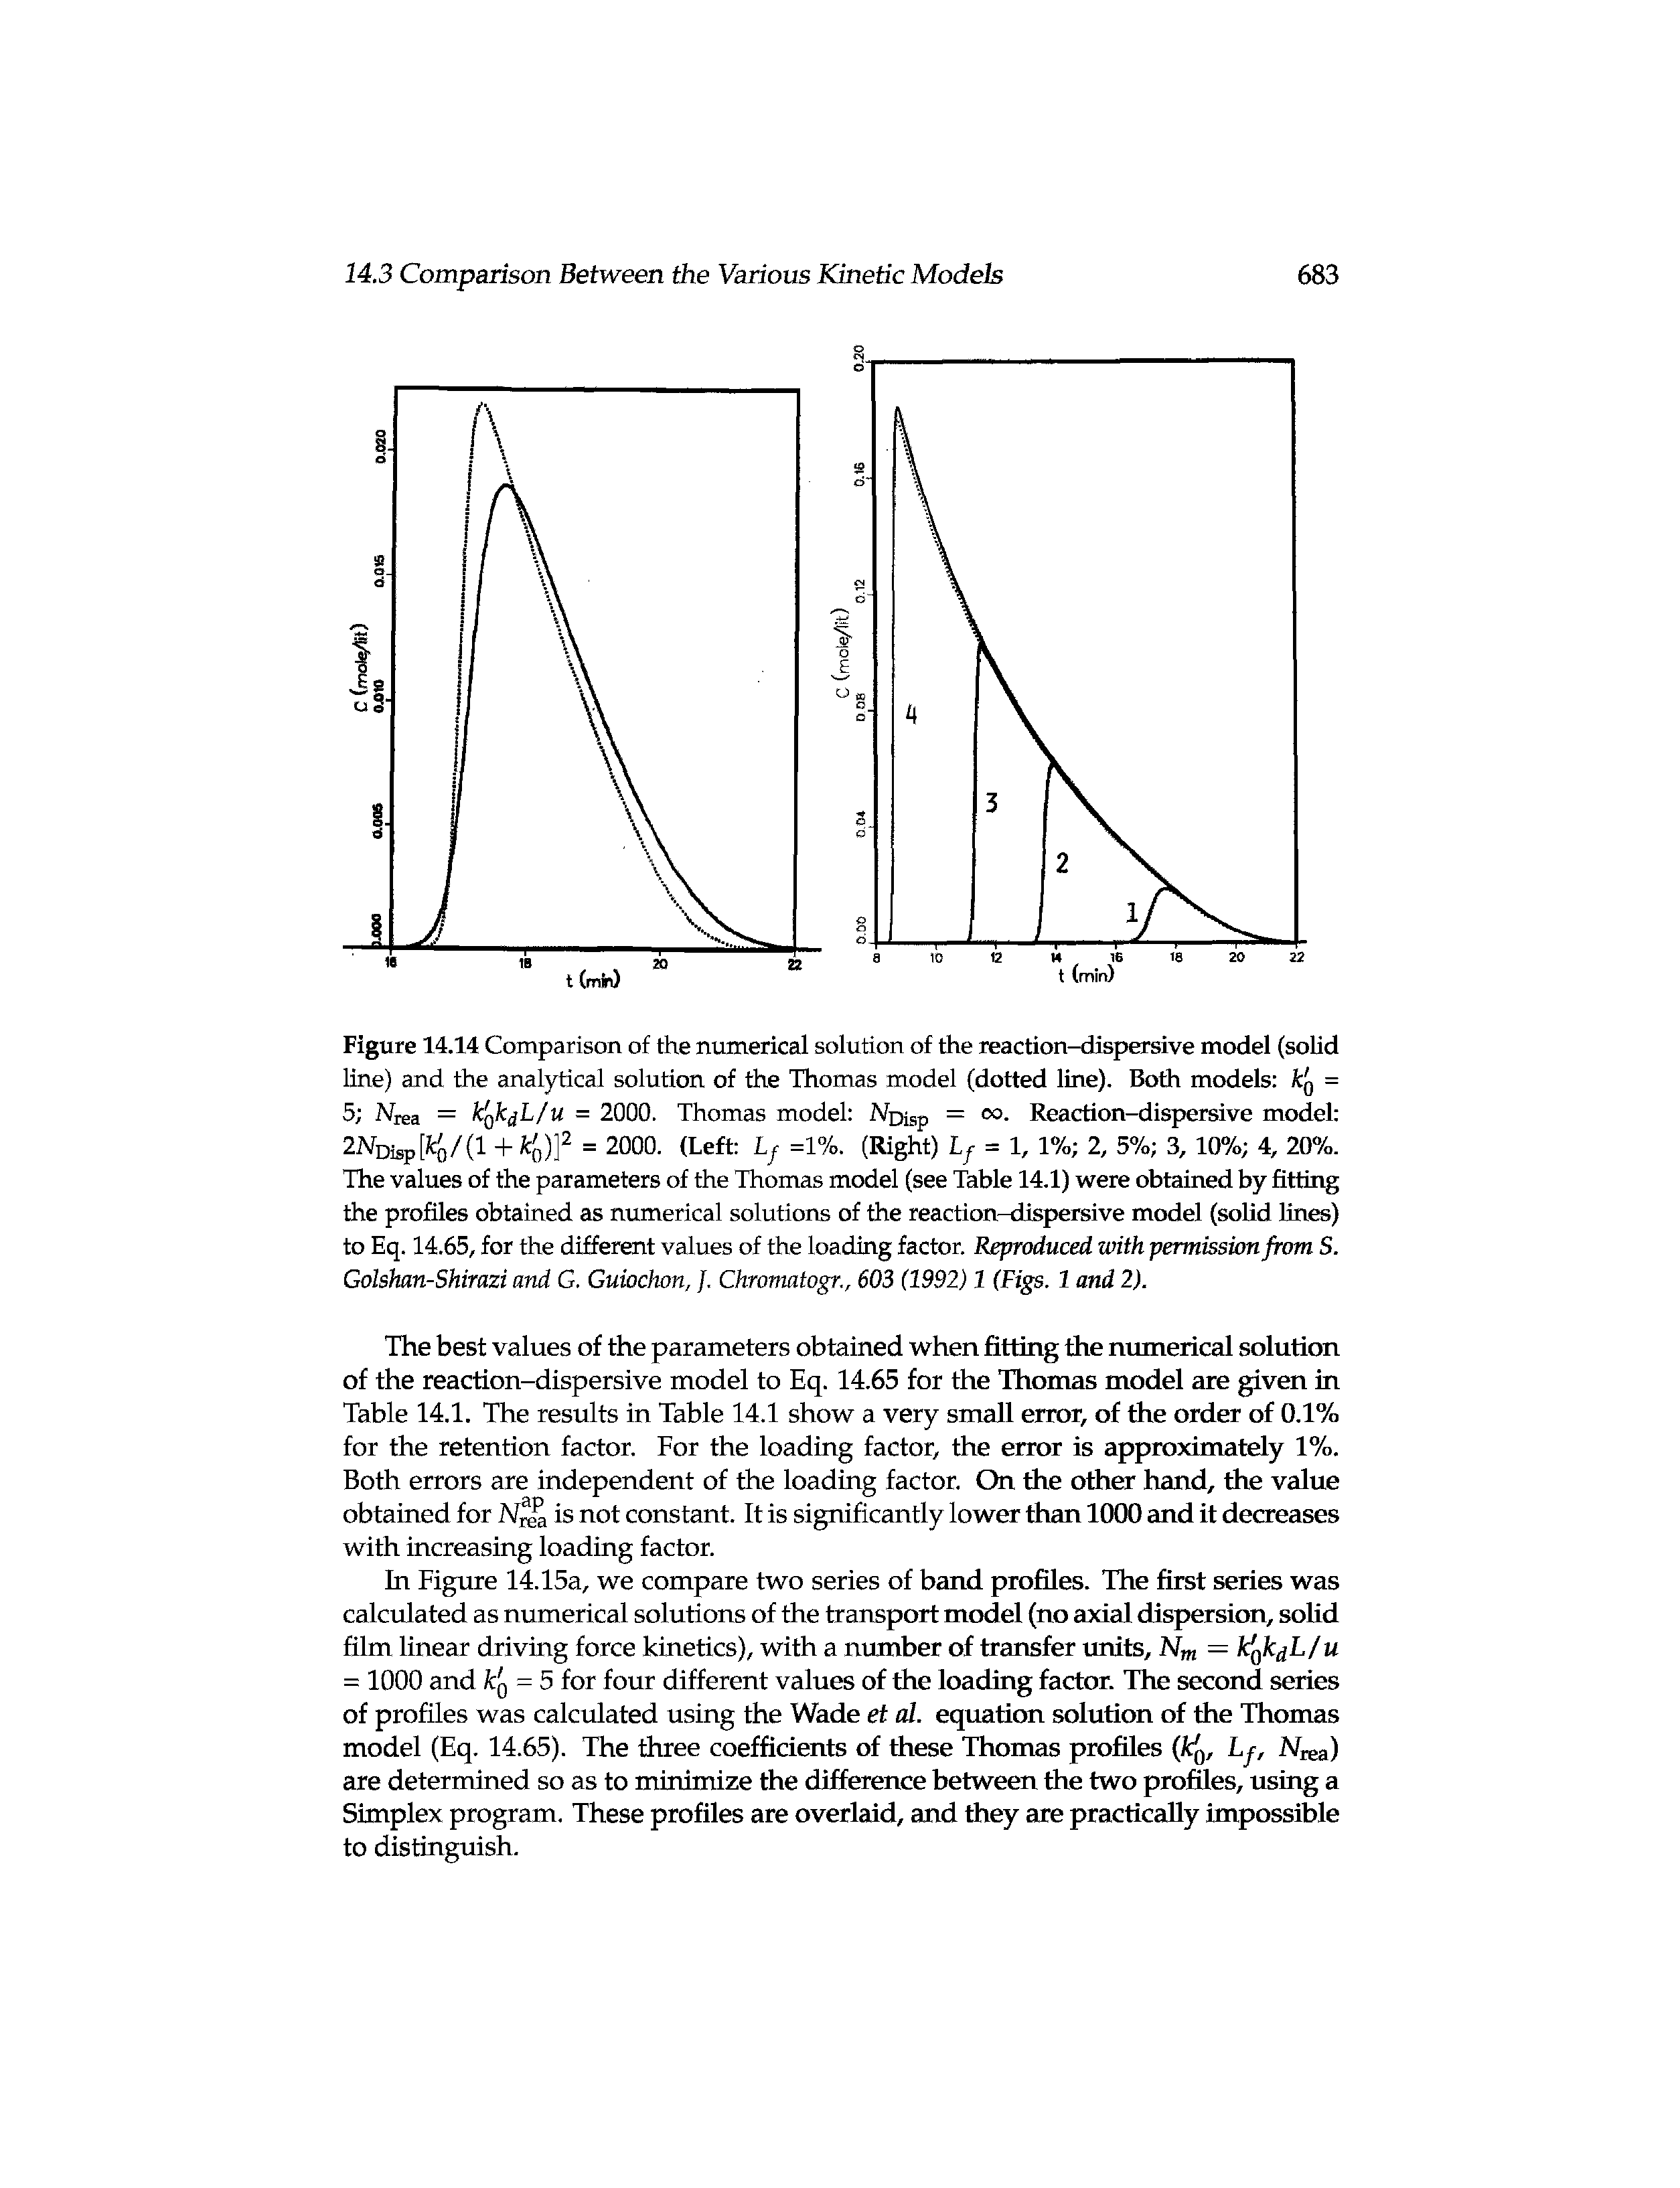 Figure 14.14 Comparison of the numerical solution of the reaction-dispersive model (solid line) and the analytical solution of the Thomas model (dotted line). Both models kg = 5 Nrea = fcgfcdL/M = 2000. Thomas model Noisp = co. Reaction-dispersive model 2NDisp[fc()/(l + = 2000. (Left Lf =1%. (Right) Lf = 1, 1% 2, 5% 3, 10% 4, 20%.